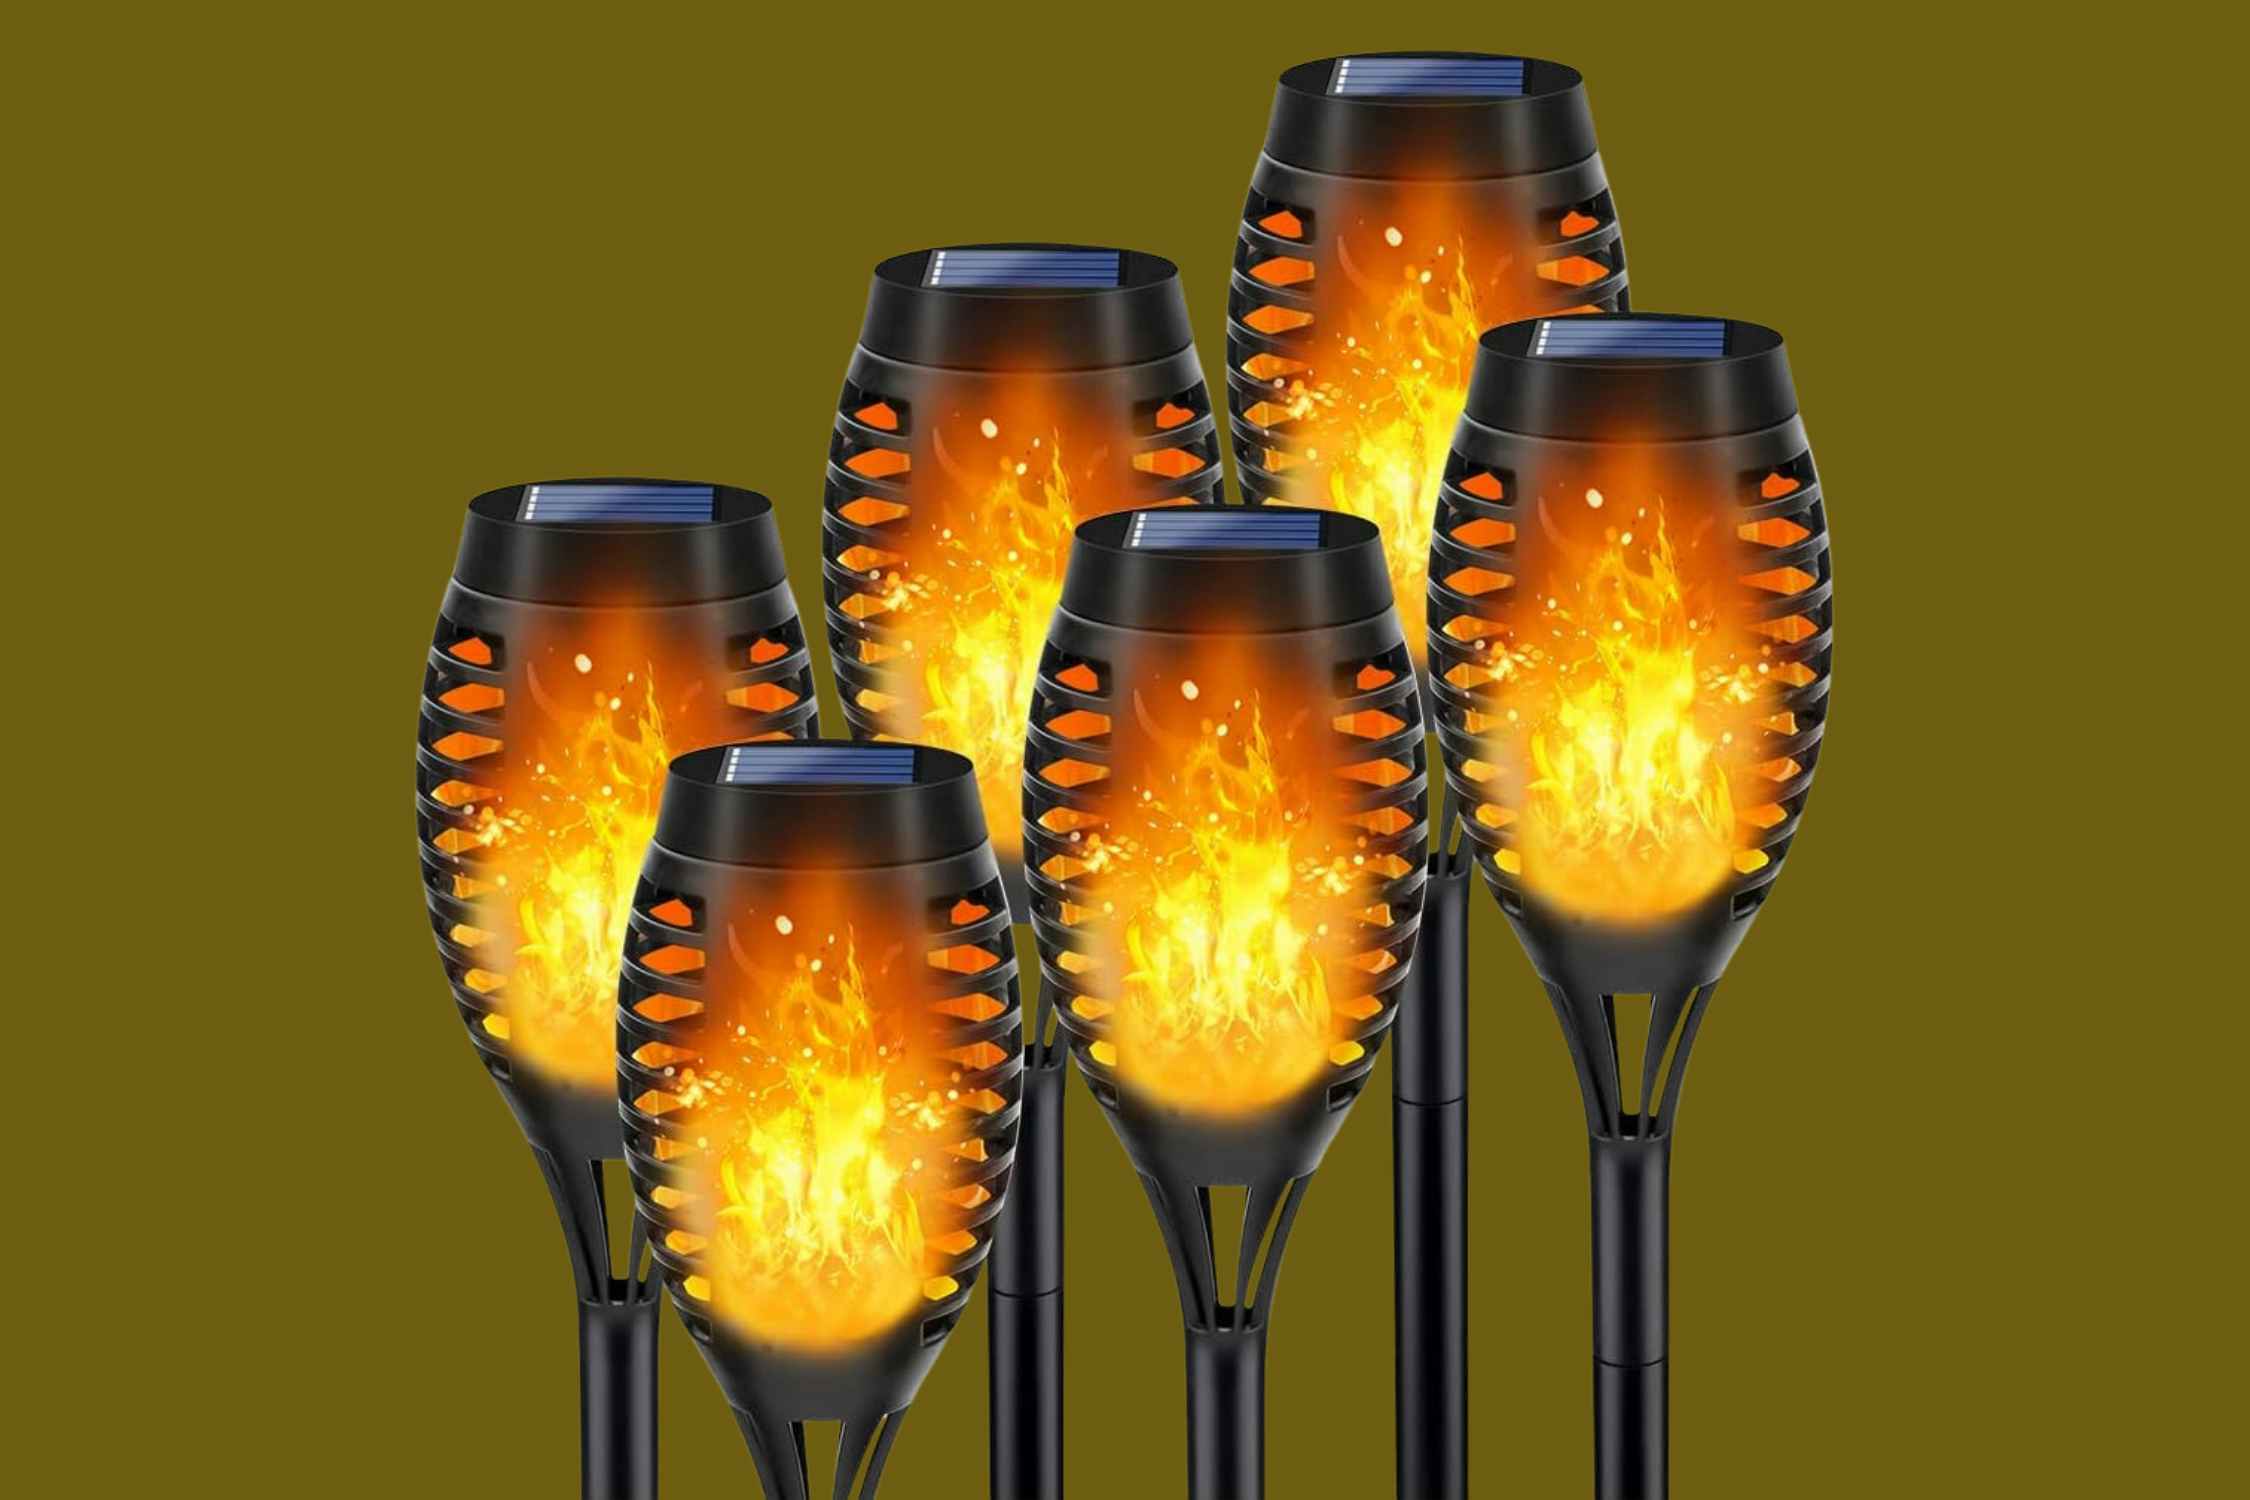 Solar Torch Lights 6-Pack, Only $20.99 on Amazon